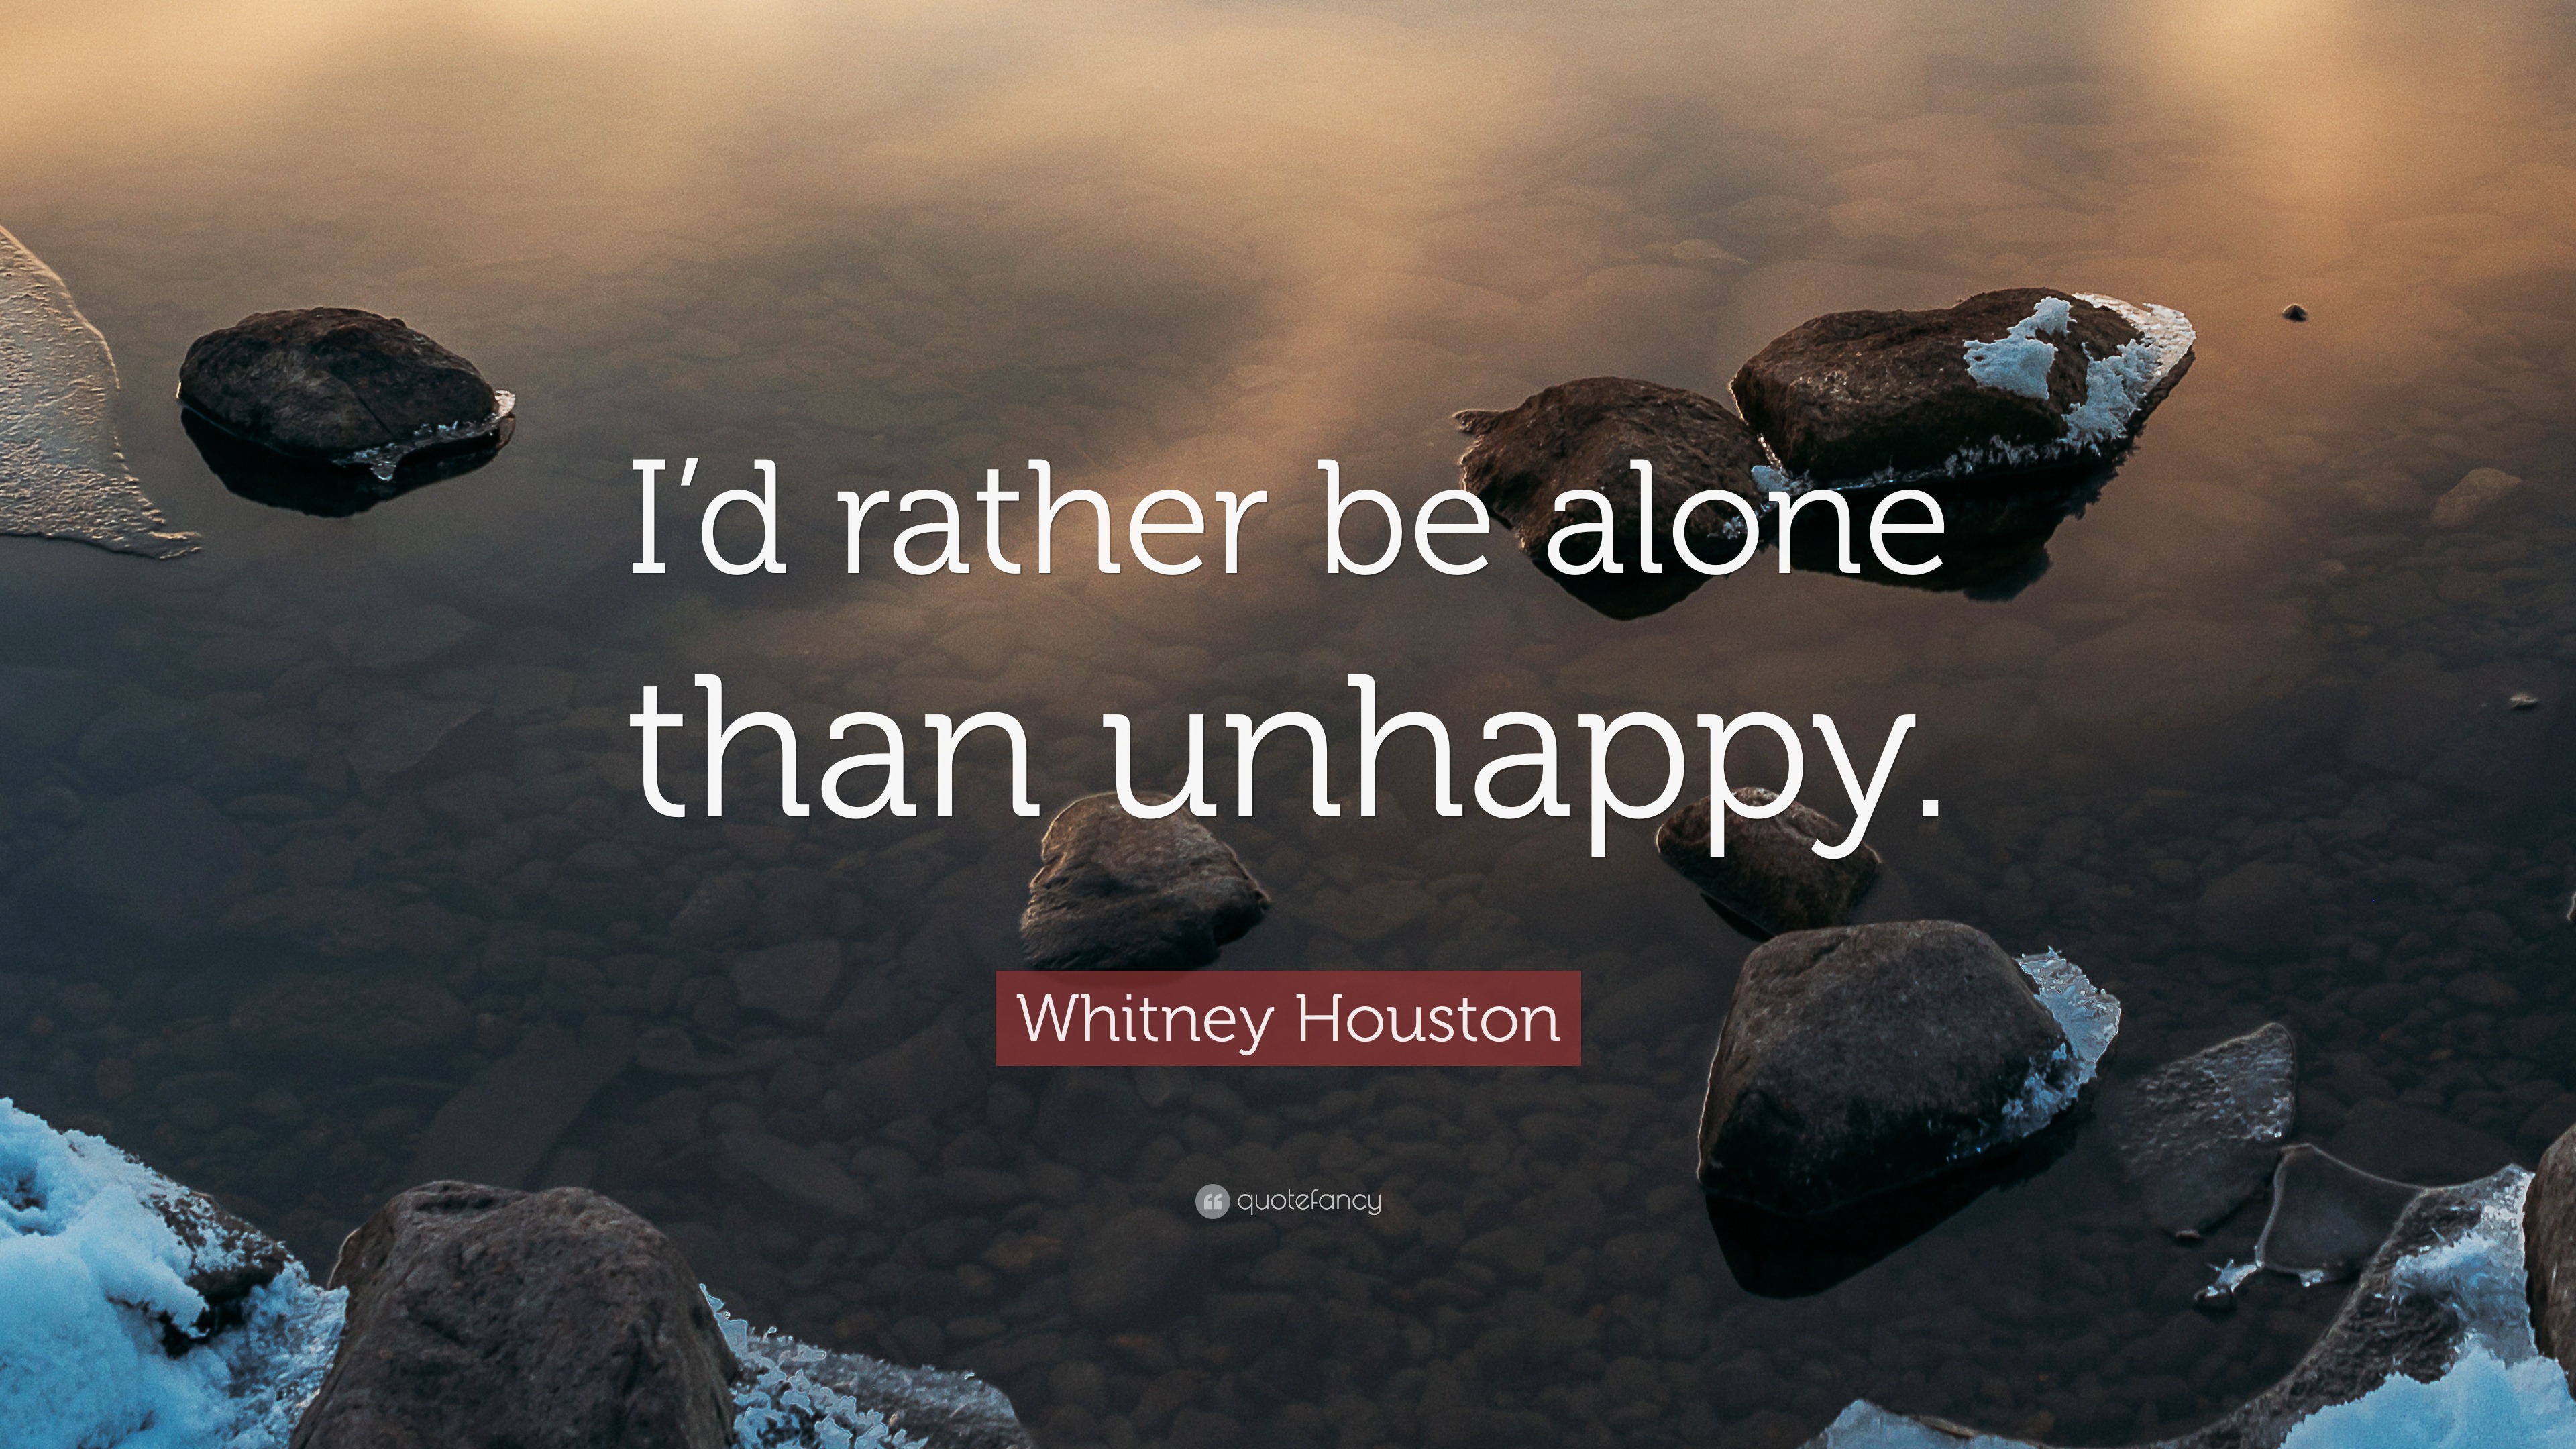 Whitney Houston Quote “I’d rather be alone than unhappy.” (7